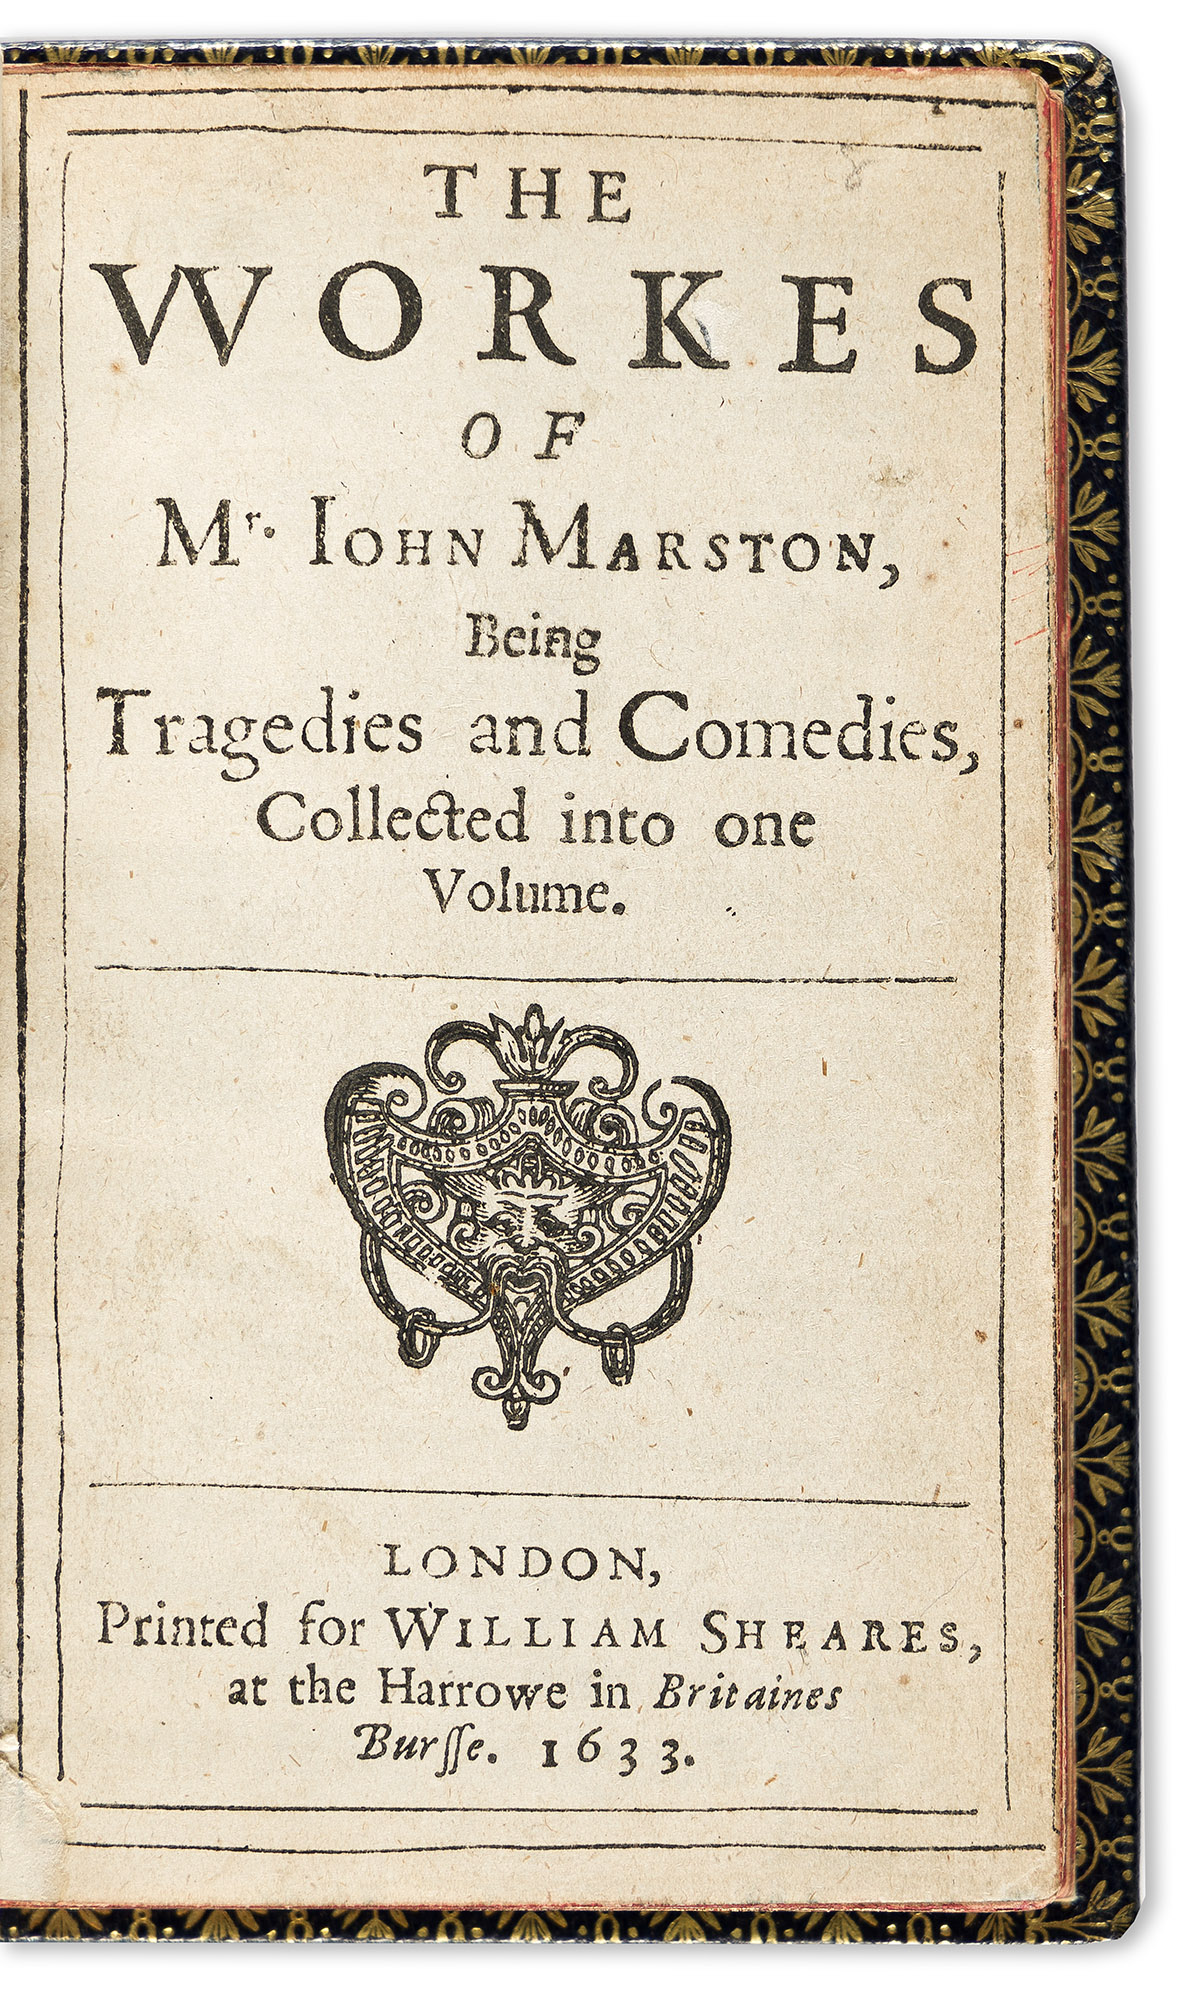 Marston, John (1575?-1634) The Workes of Mr. John Marston, Being Tragedies and Comedies, Collected into one Volume.